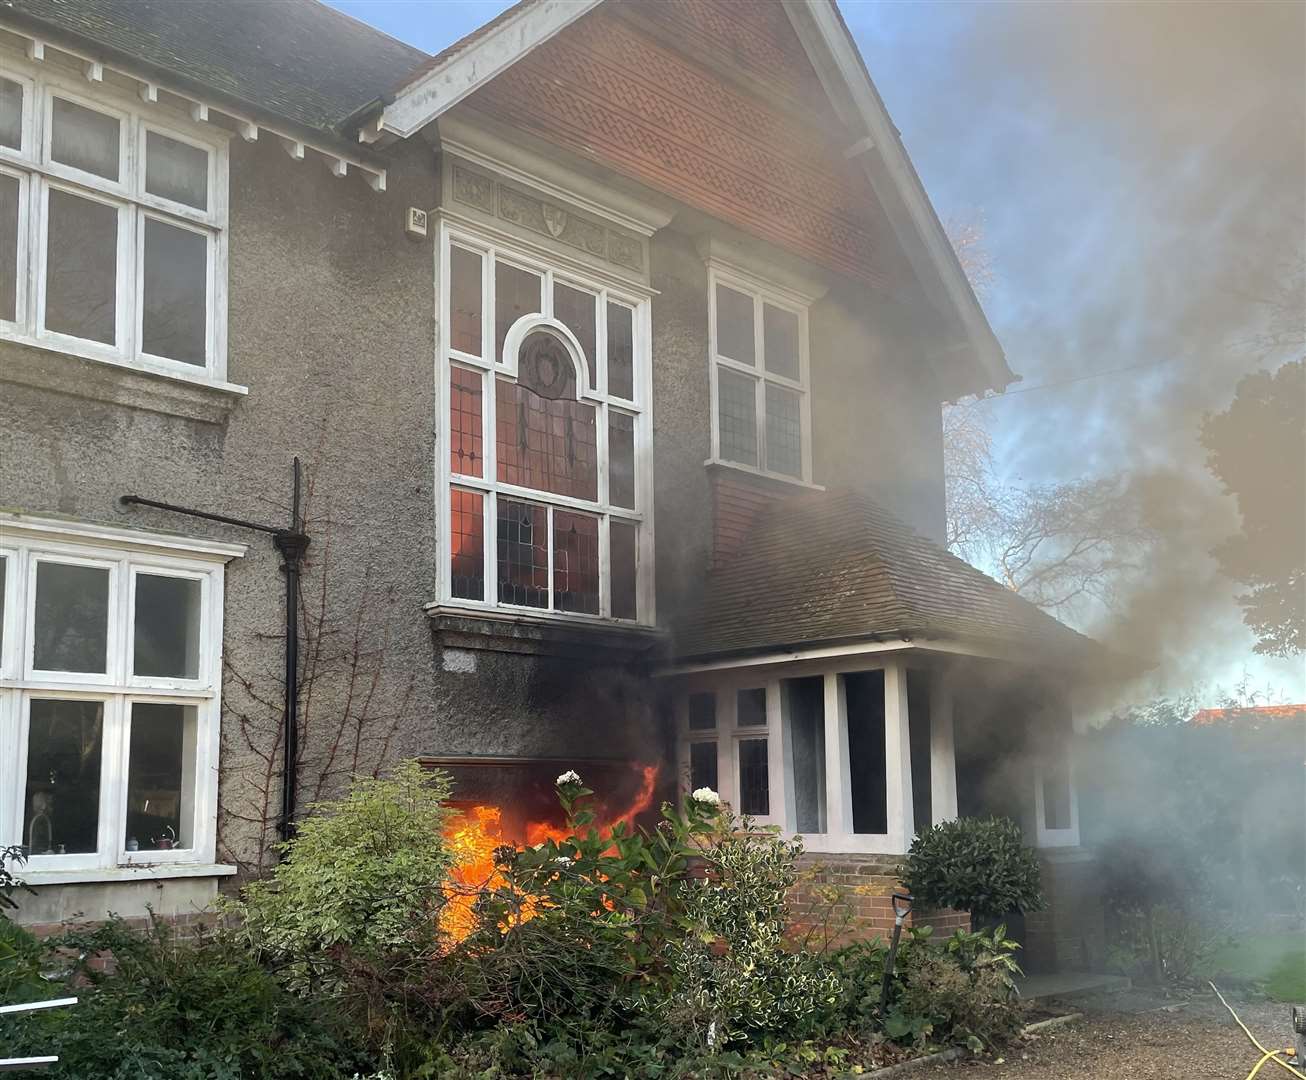 The family home in Saltwood was destroyed in a fire last Wednesday. Pictures courtesy of the Sercombe family and Charlotte Barcham